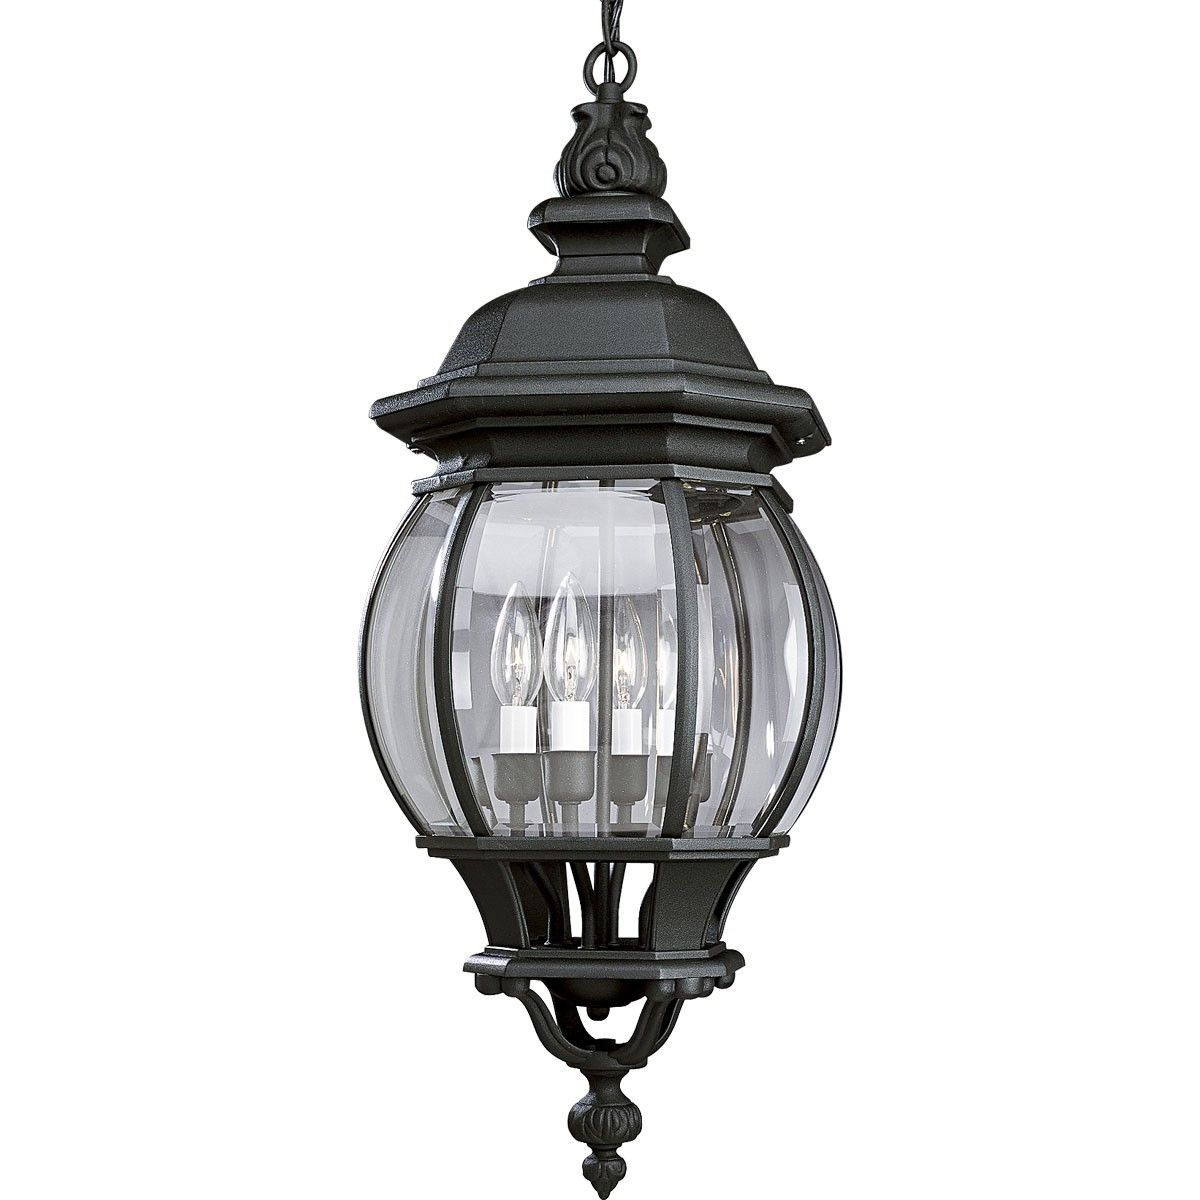 Onion Design Four Light Hanging Lantern With Clear Beveled Glass Regarding White Outdoor Hanging Lanterns (View 14 of 15)